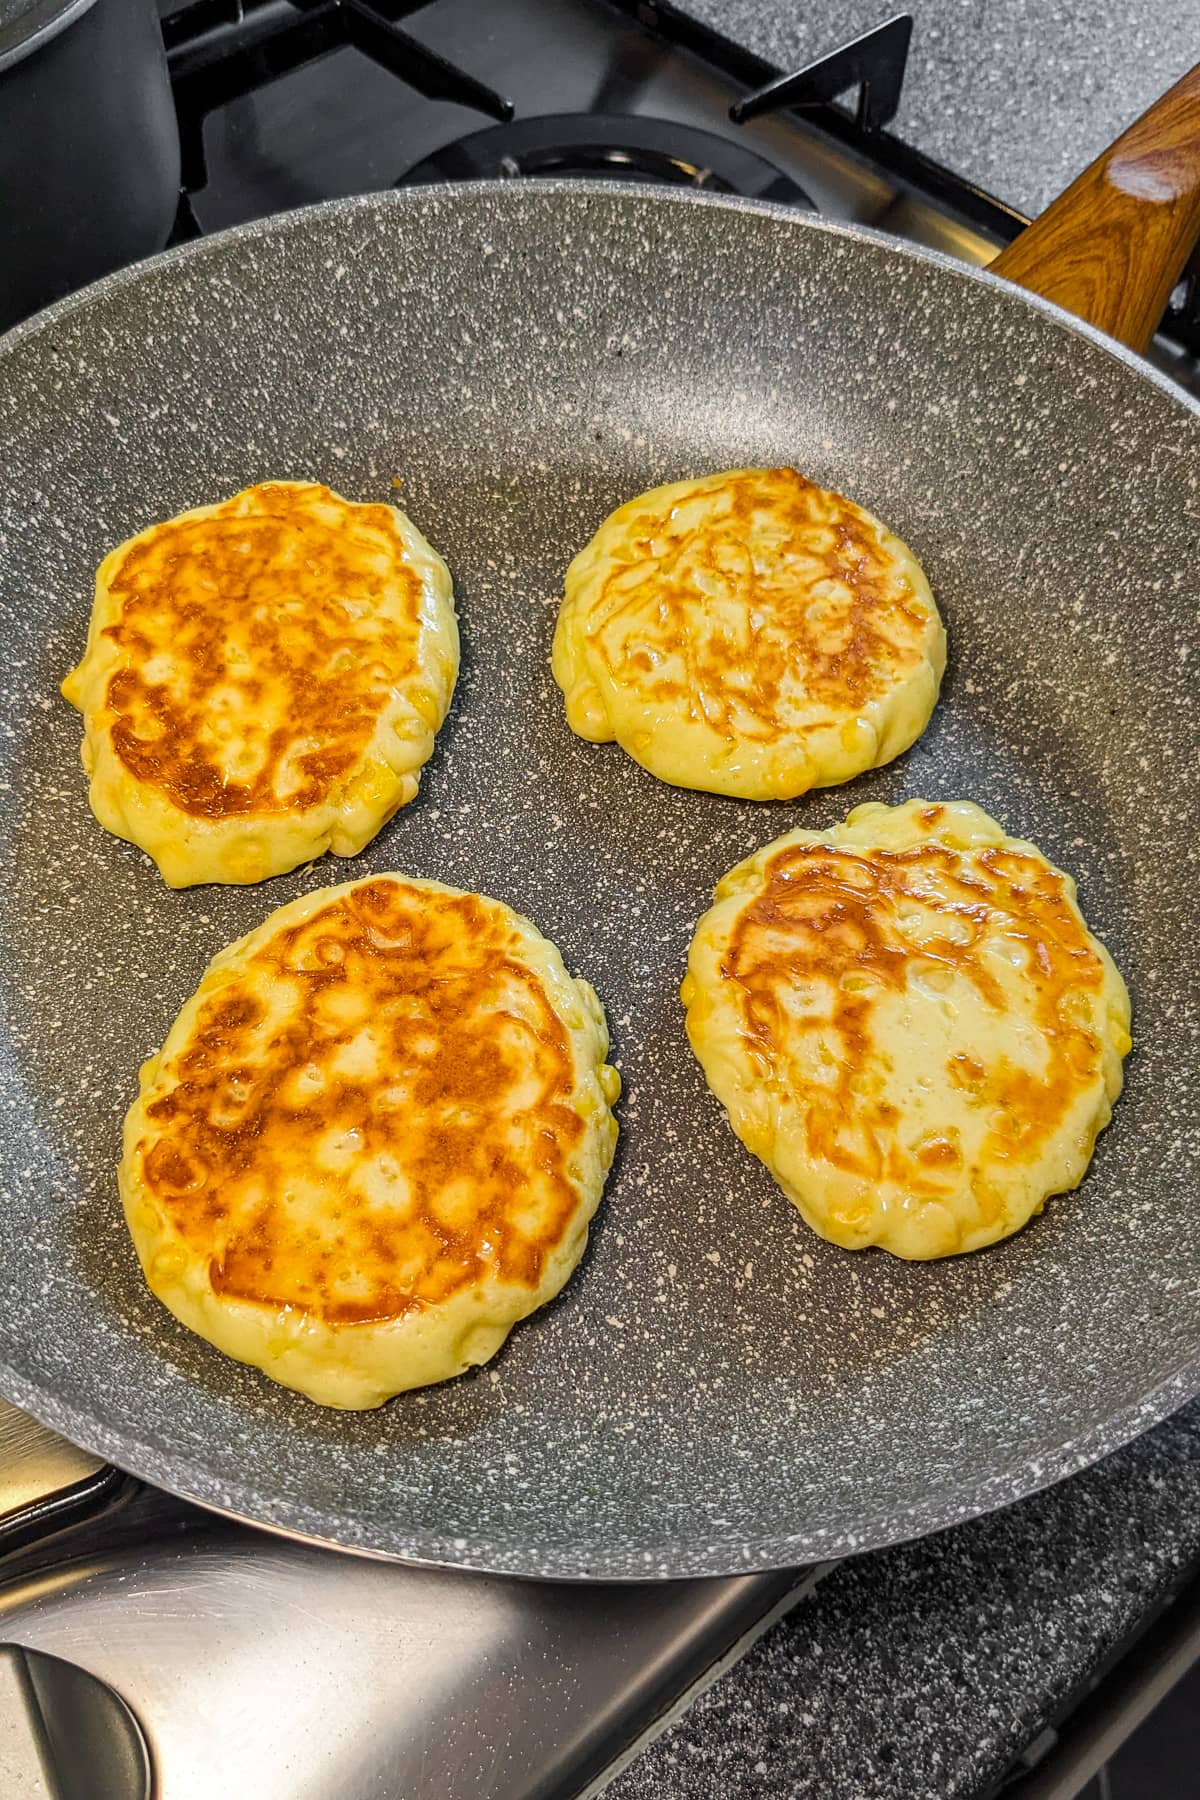 4 corn fritters frying in a frying pan on the stove.